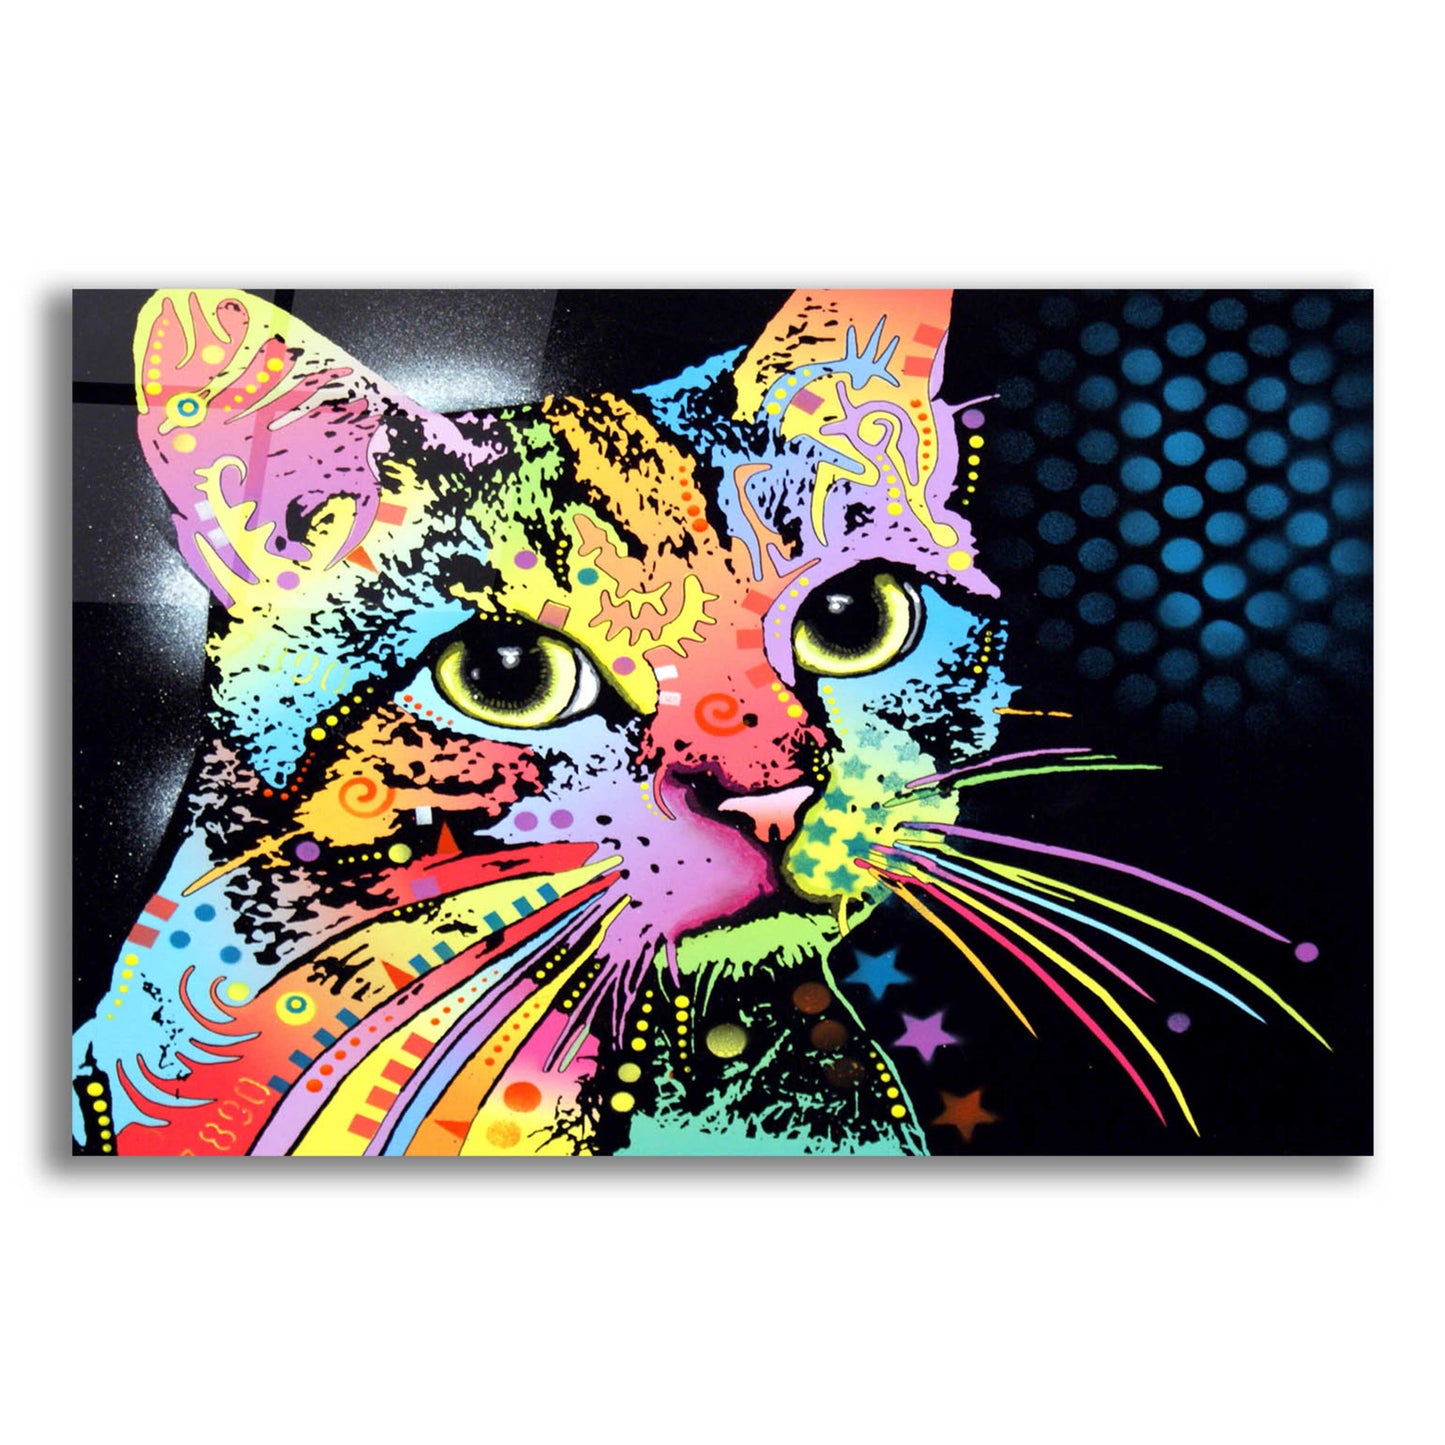 Epic Art 'Catillac New' by Dean Russo, Acrylic Glass Wall Art,24x16